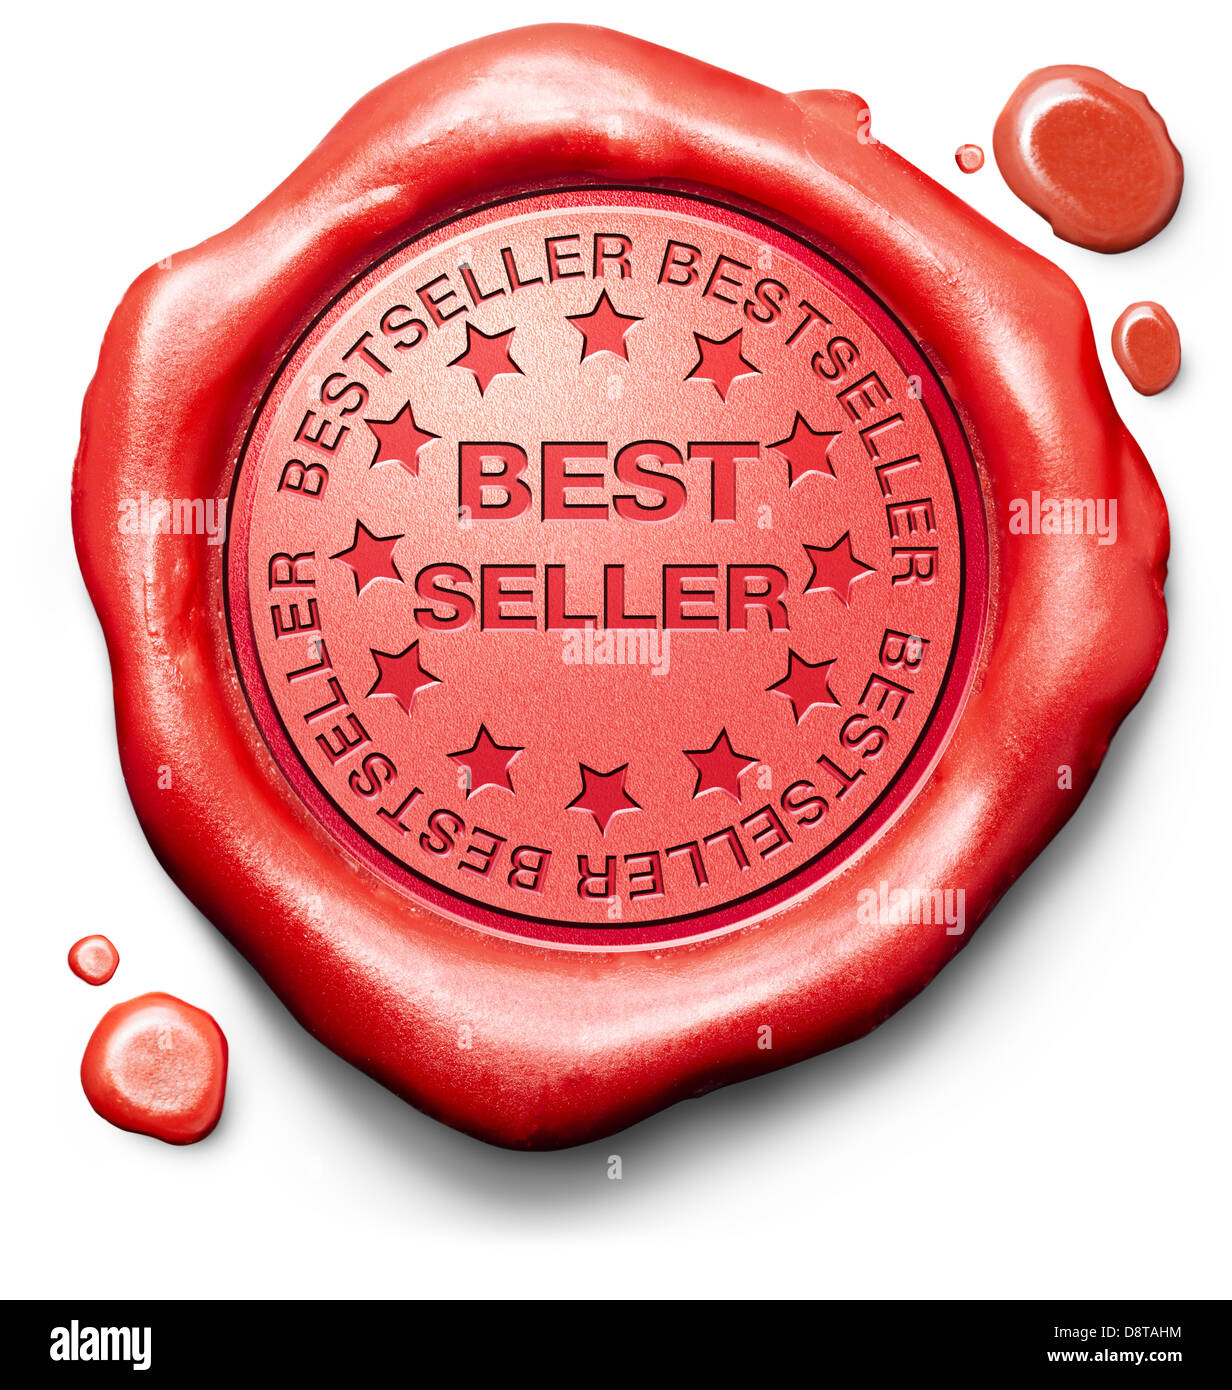 best seller best seller product top quality and most wanted item red wax seal stamp icon Stock Photo